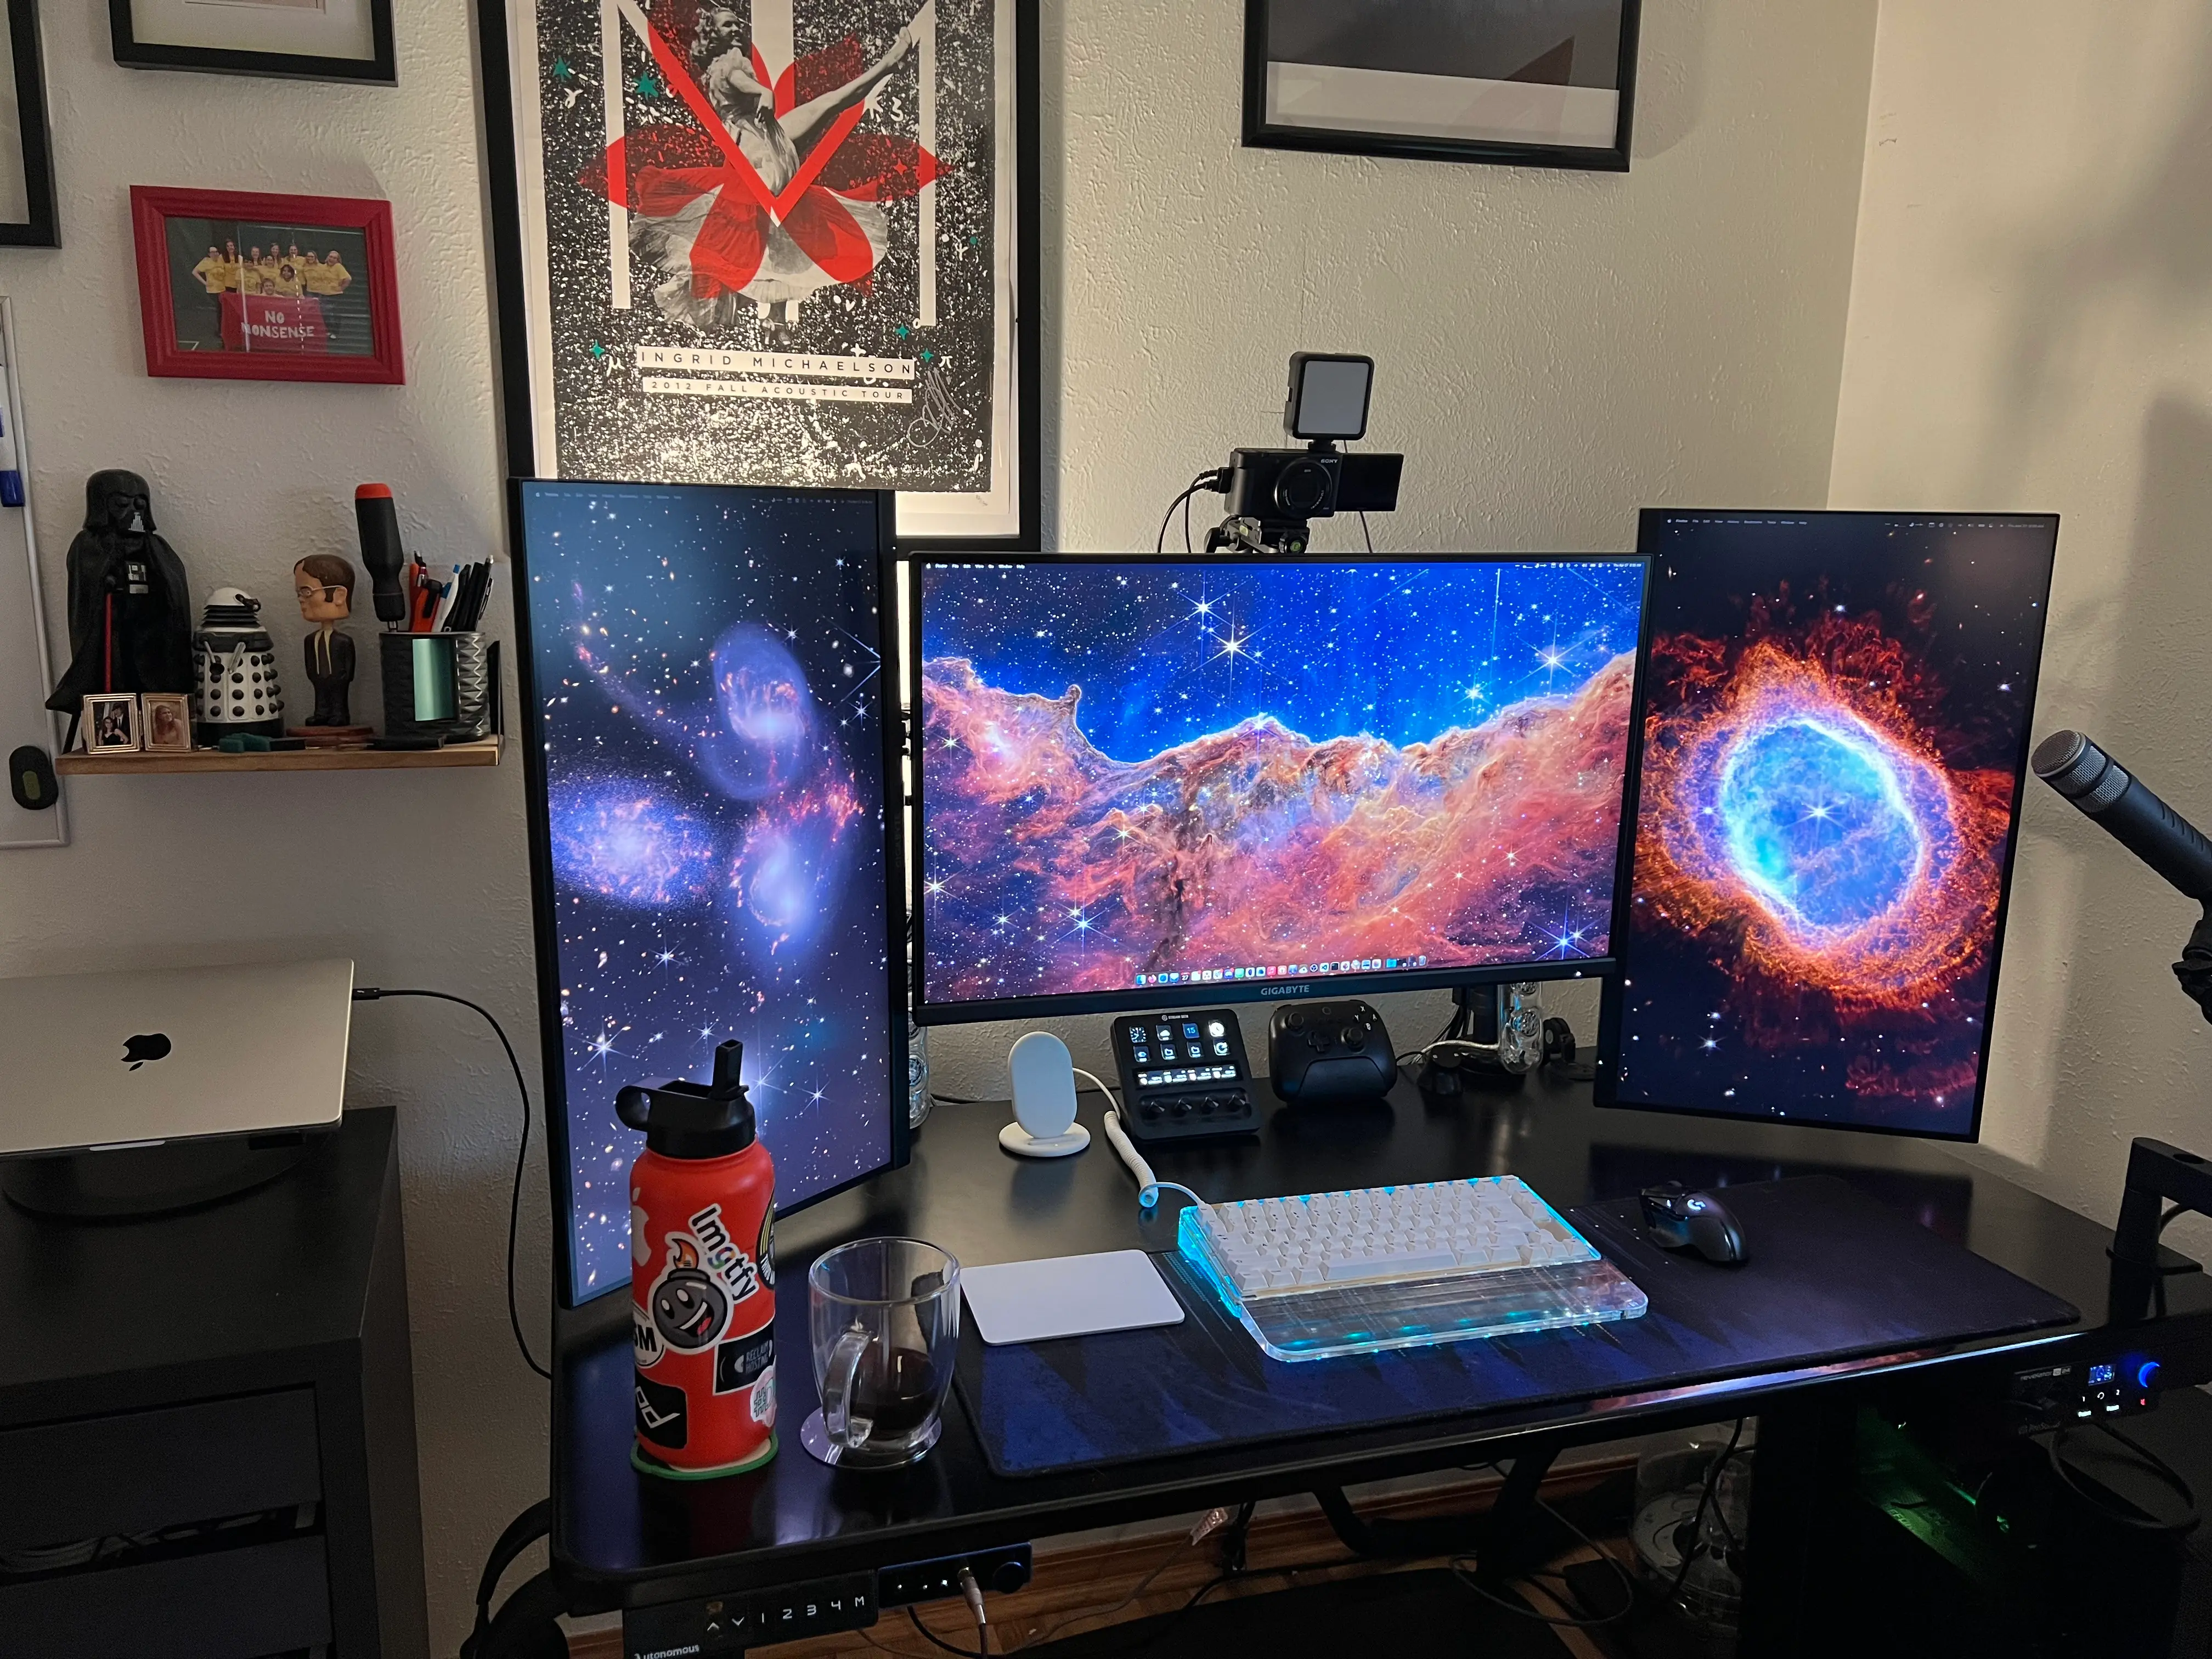 A picture of a desk with a keyboard, mouse trackpad and three monitors. One large center monitor, and two portrait monitors on either side of it.